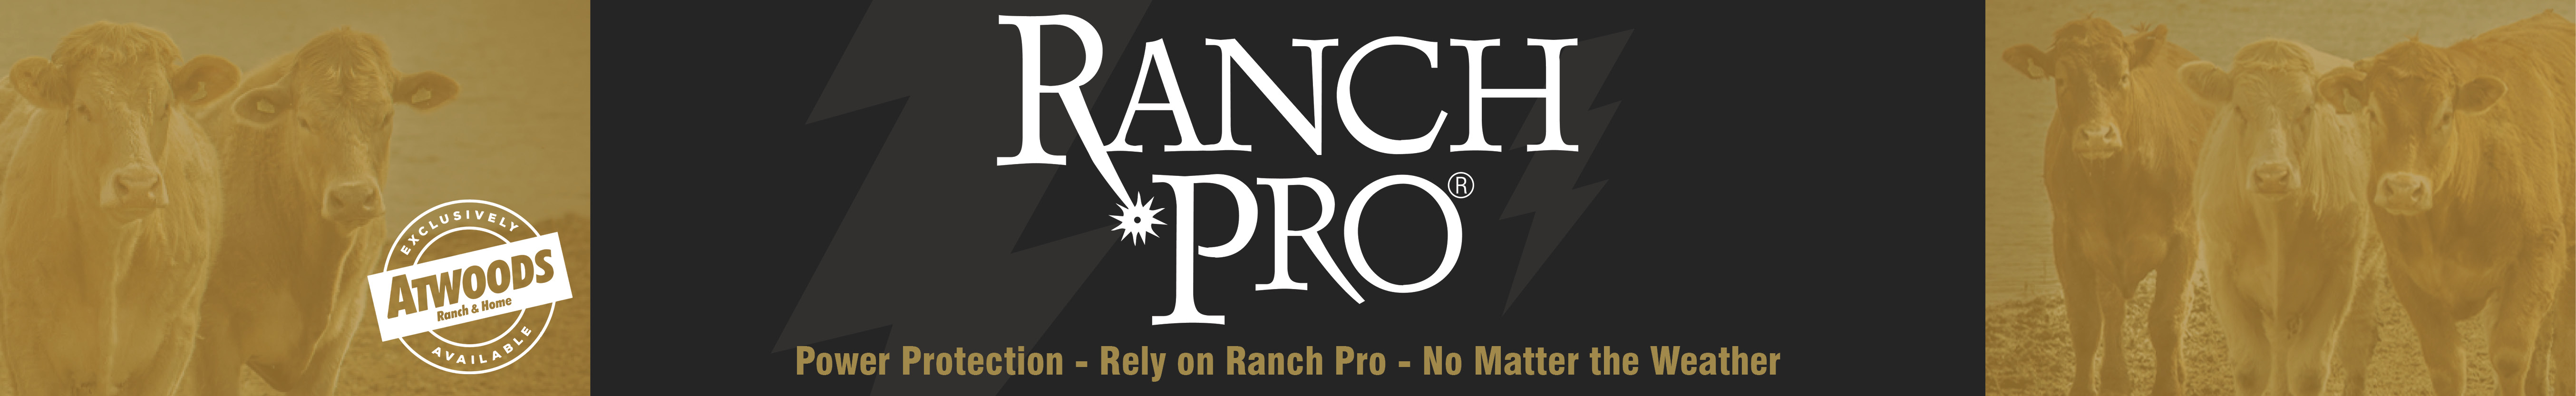 Ranch Pro Fencers